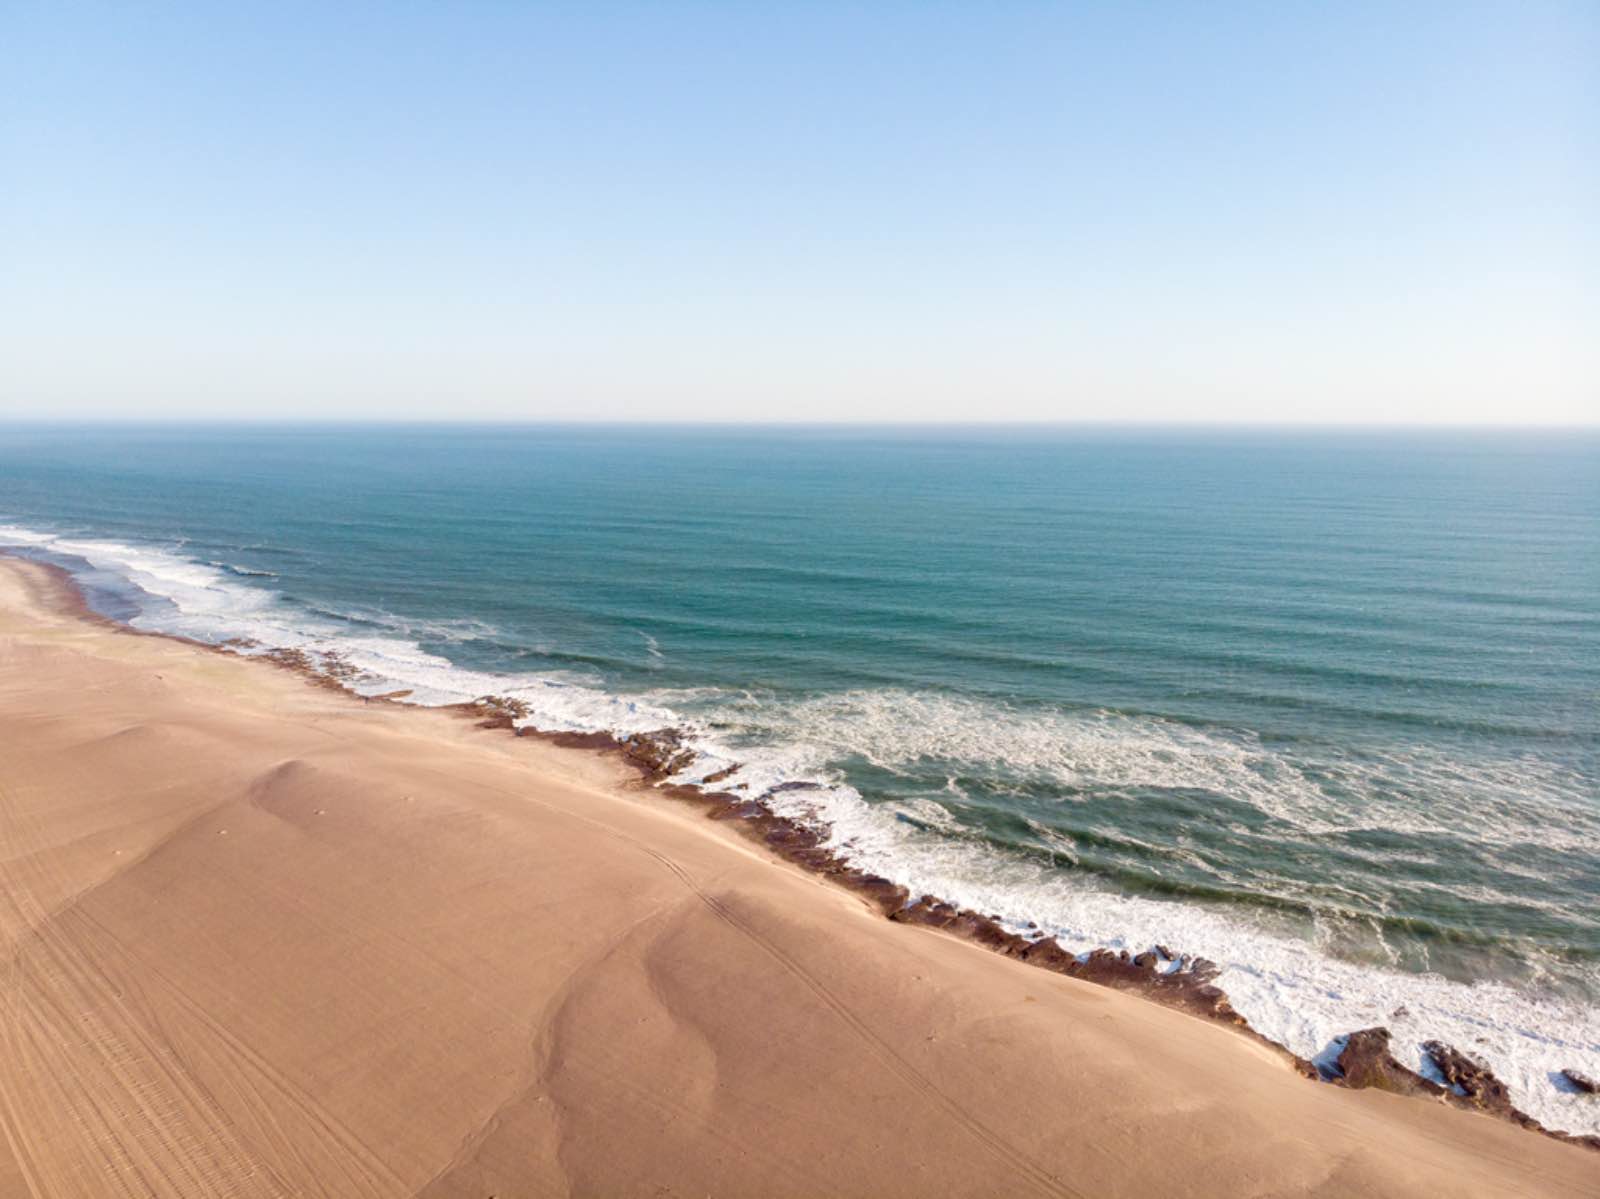 Skeleton Coast seen from above at Shipwreck Lodge